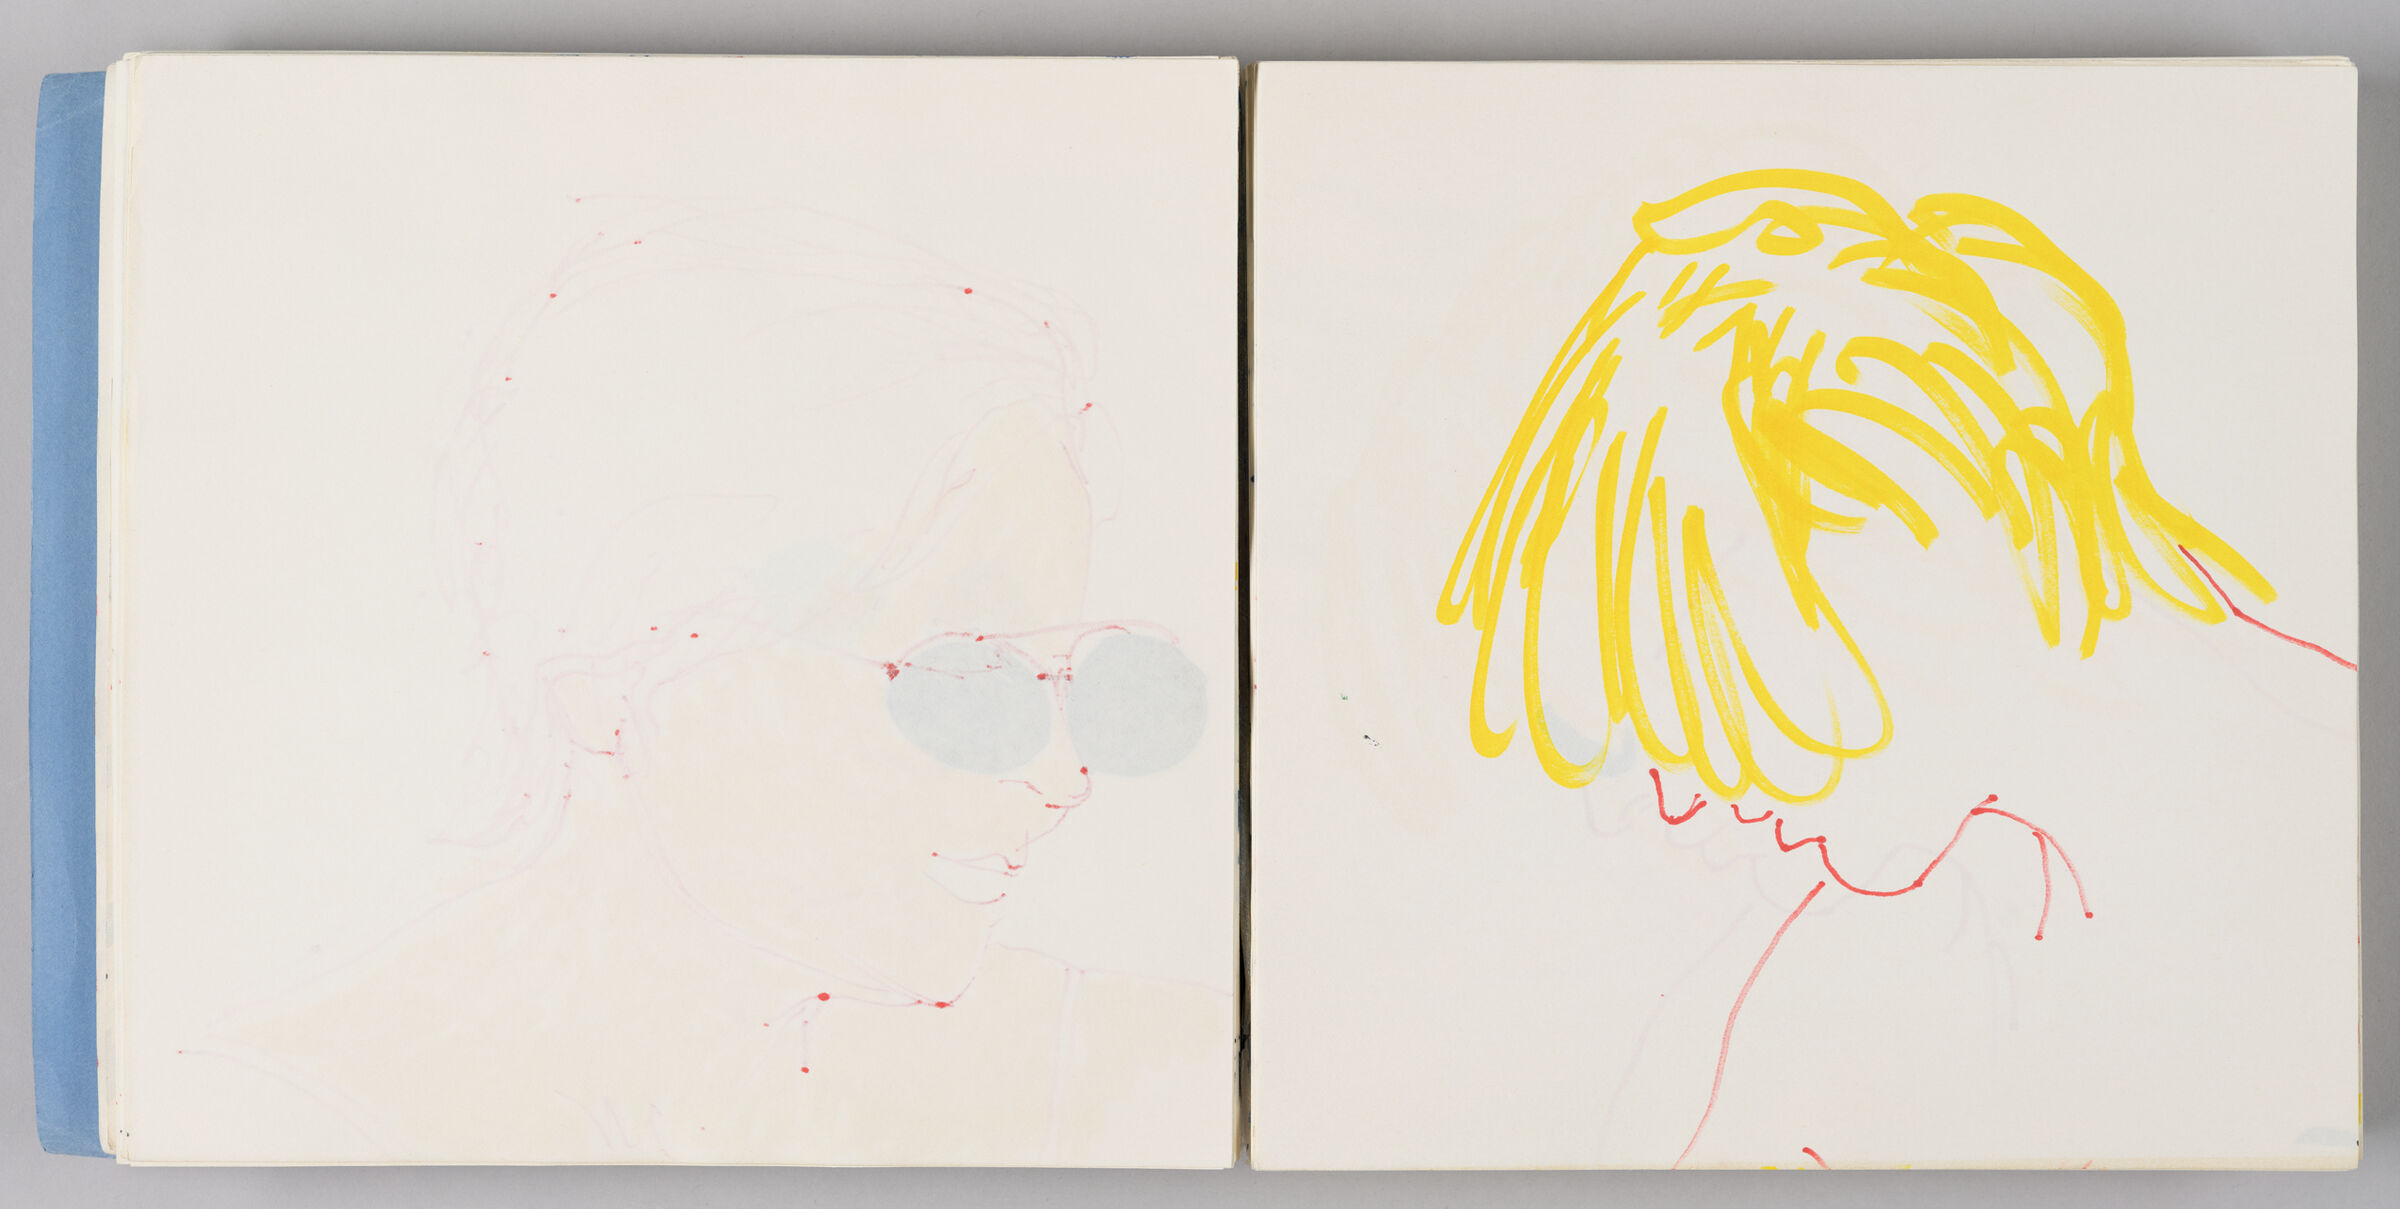 Untitled (Bleed-Through Of Previous Page, Left Page); Untitled (Portrait Of Female Figure [Elizabeth], Right Page)
